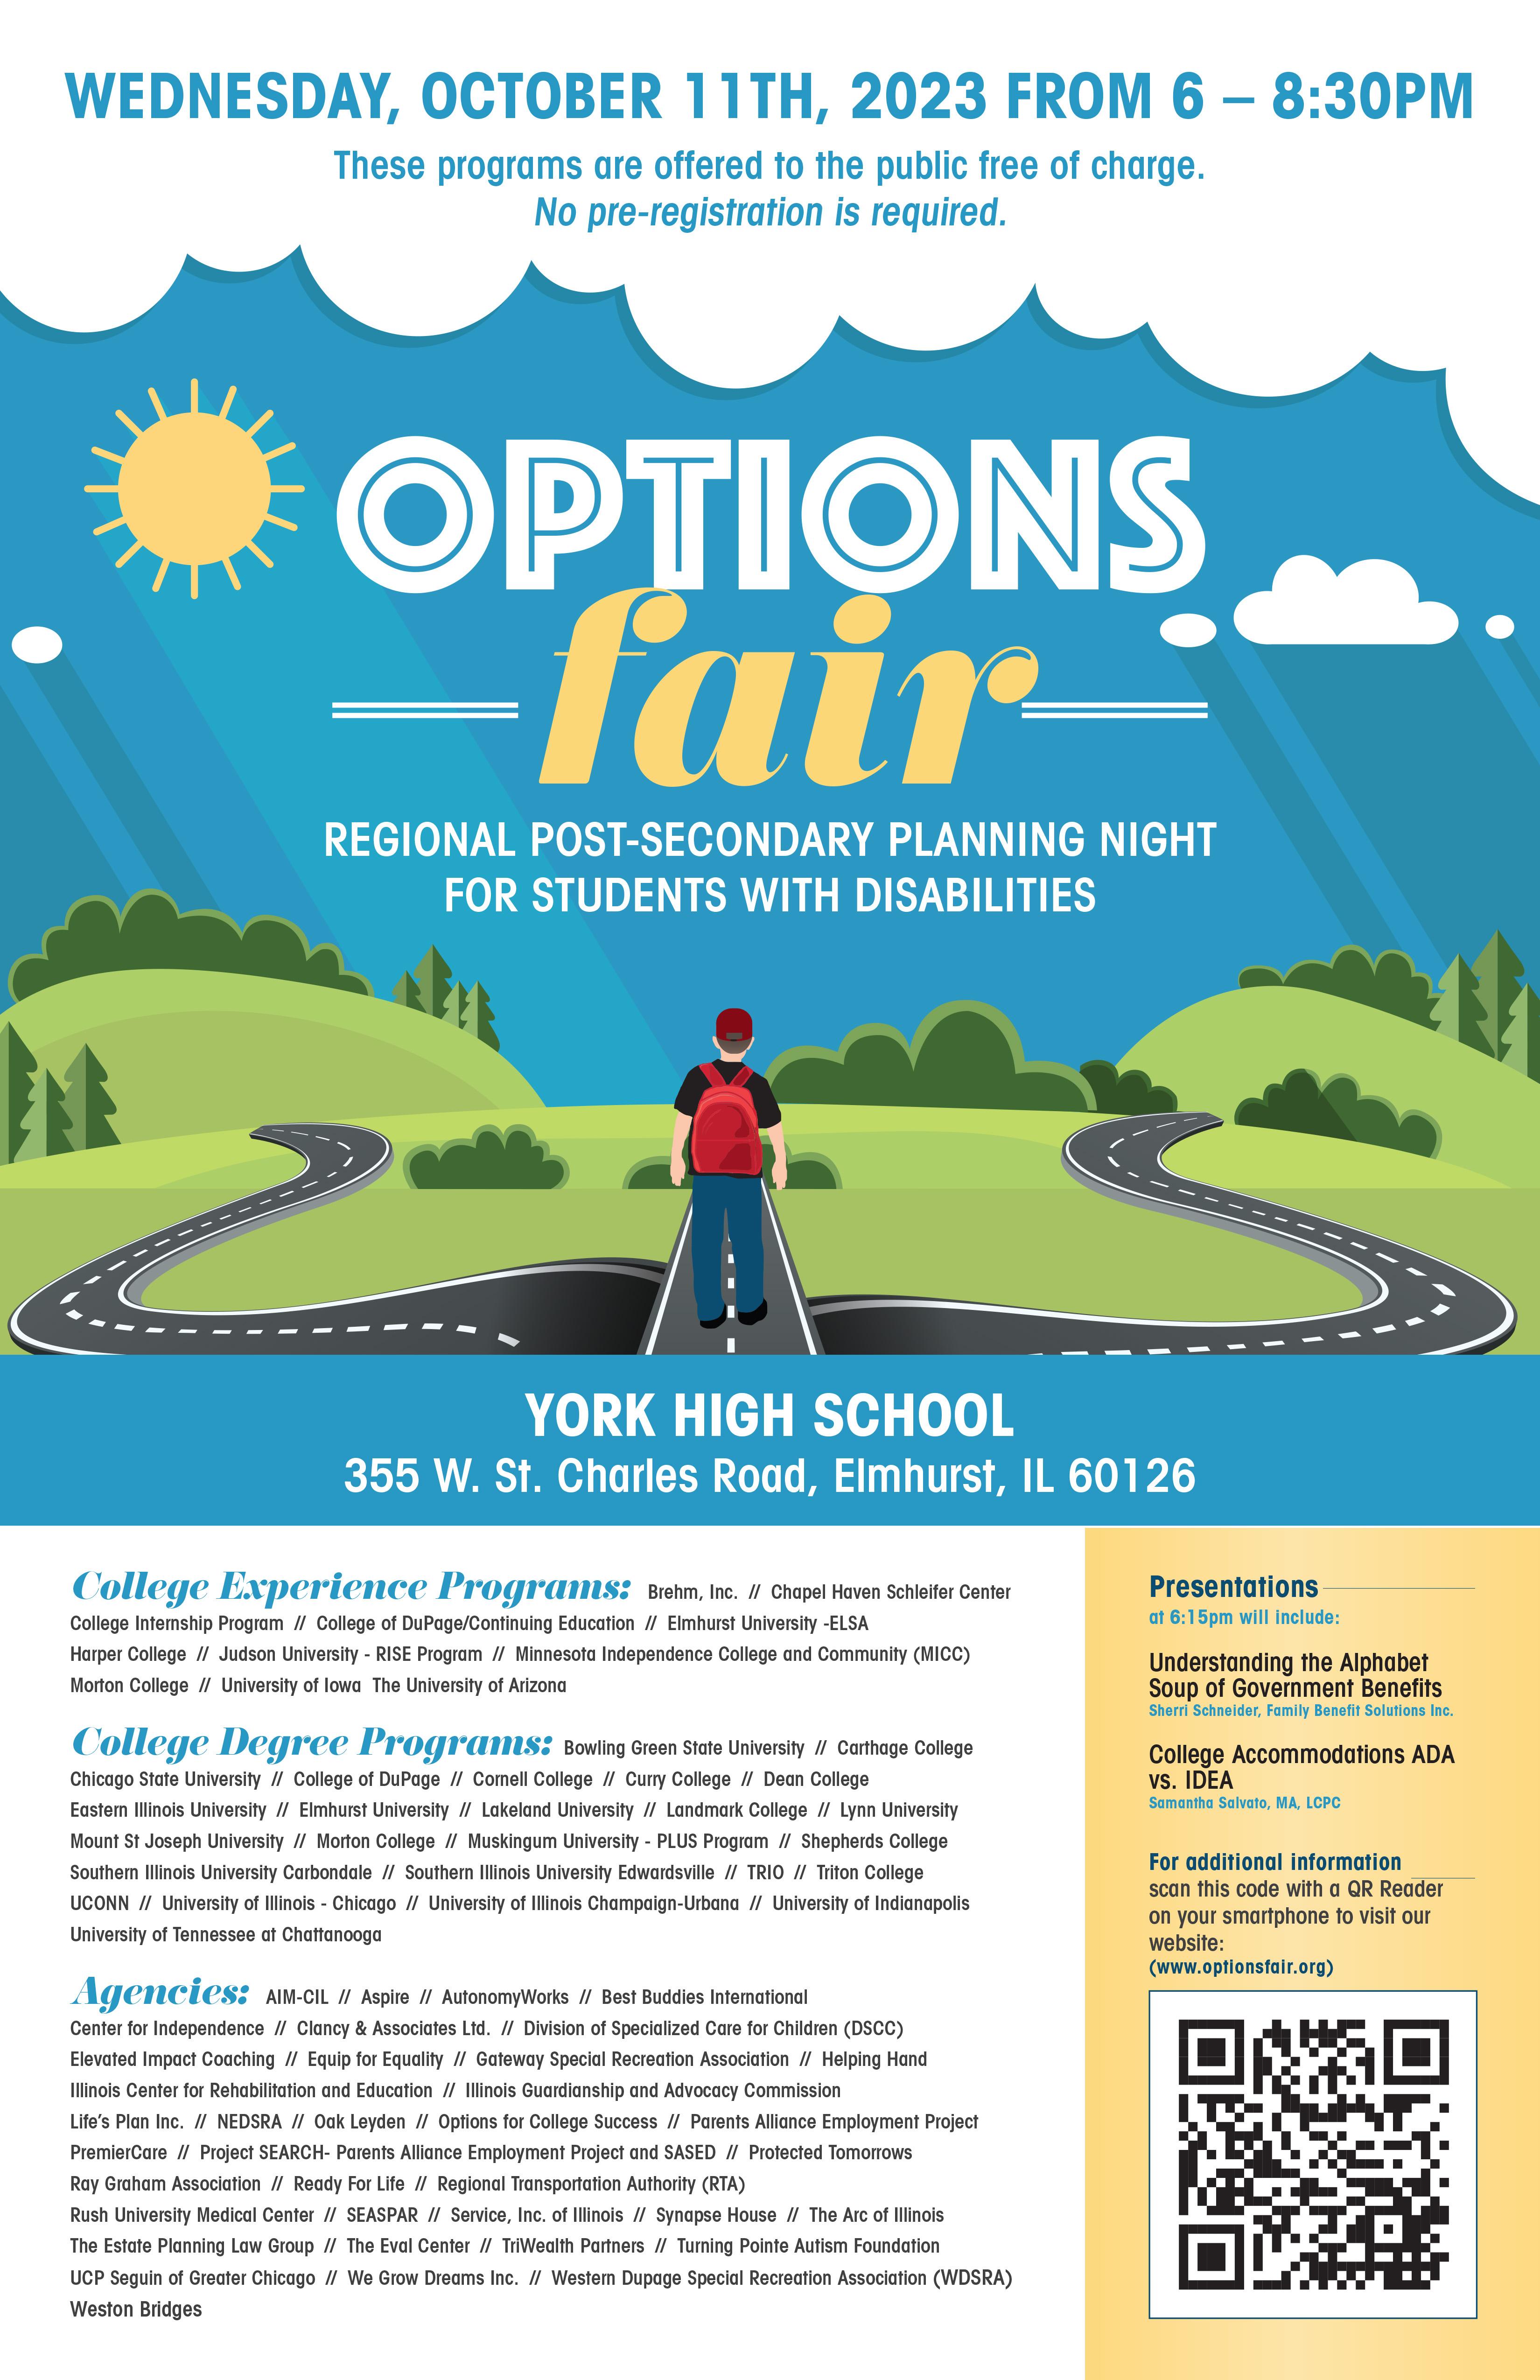 Students with special needs and their families invited to attend Options Fair to learn about post-secondary opportunities and available services